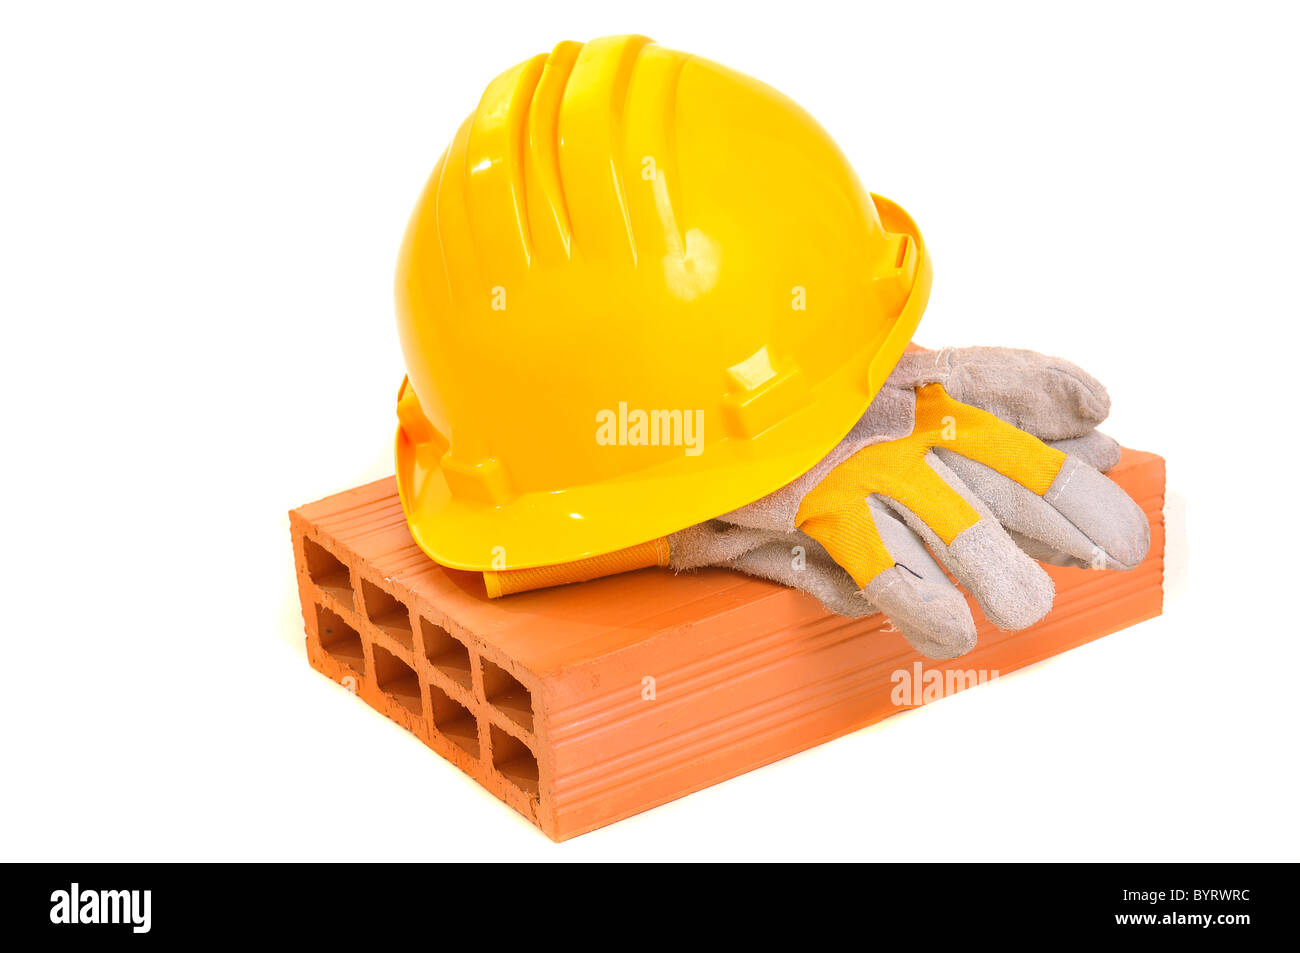 Construction gear isolated in white Stock Photo